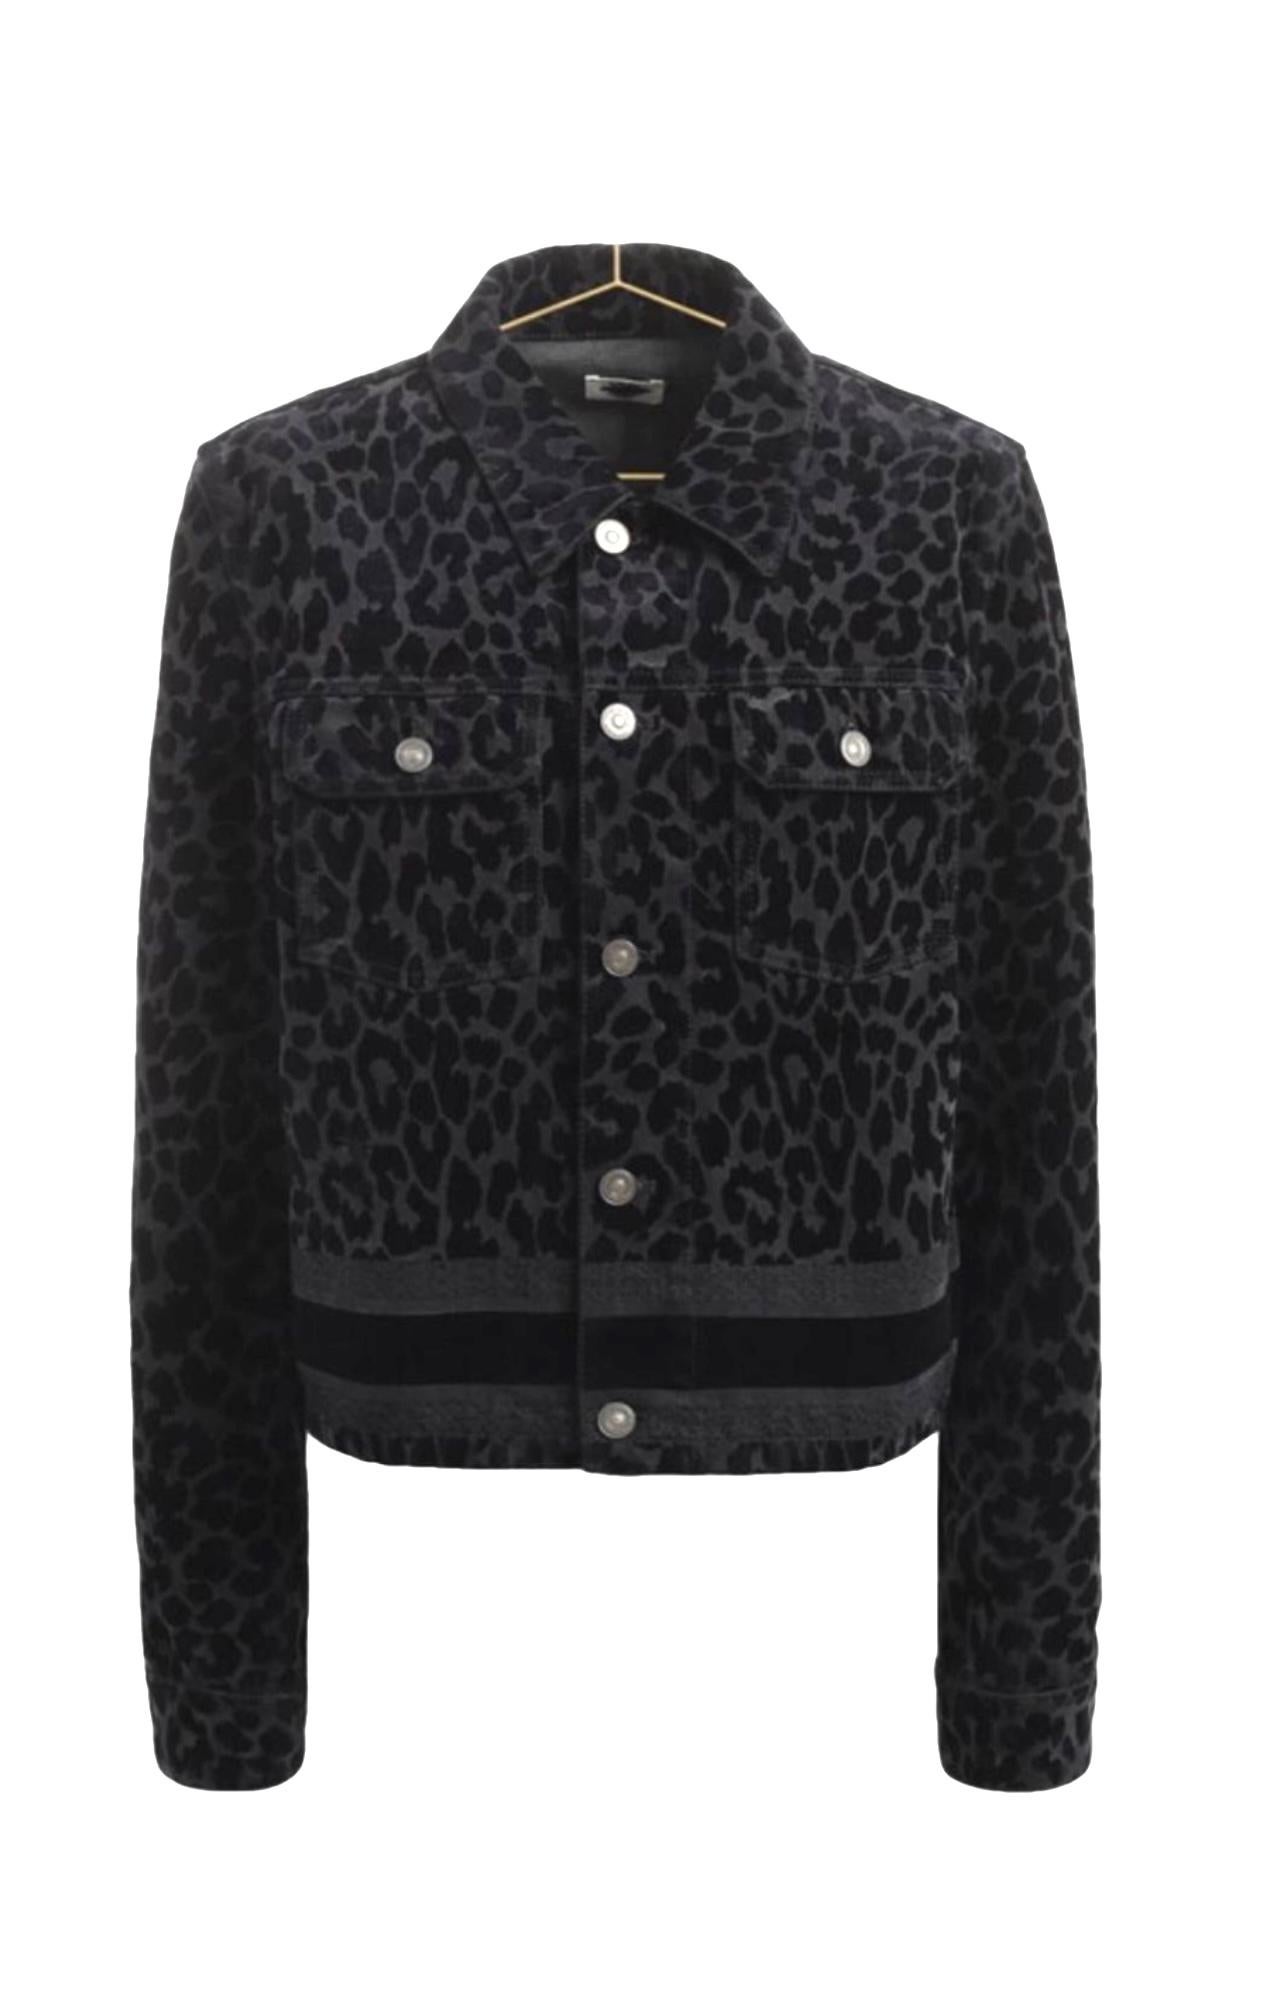 Christian Dior Logo Band Leopard Jacket In Excellent Condition For Sale In Dubai, AE